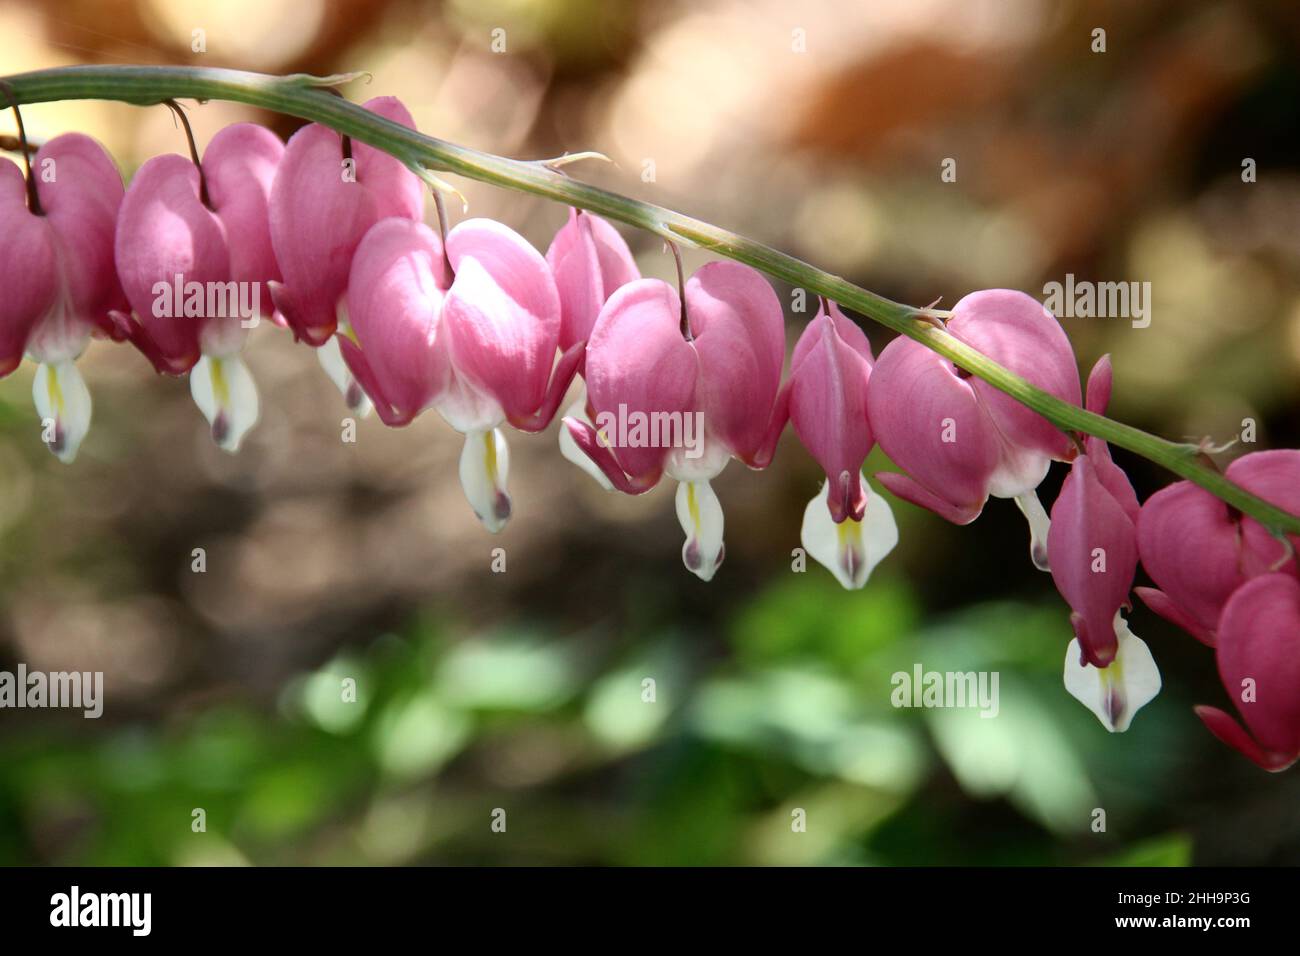 Beautiful pink bleeding heart flowers on a long stem, early spring, Illinois. Stock Photo